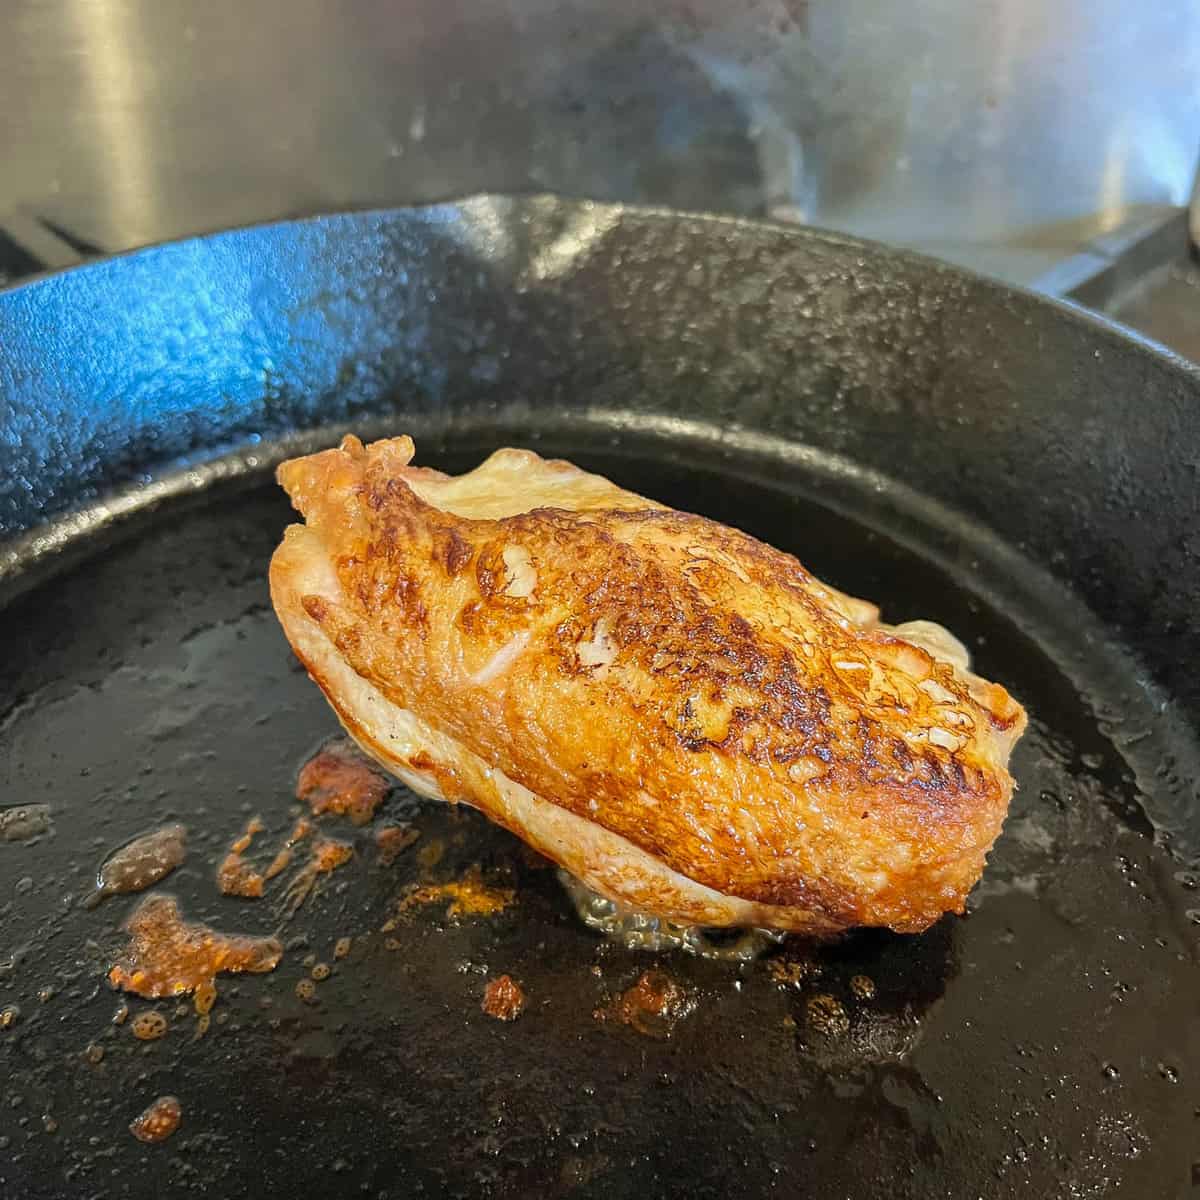 Chicken breast cooking in cast iron skillet.